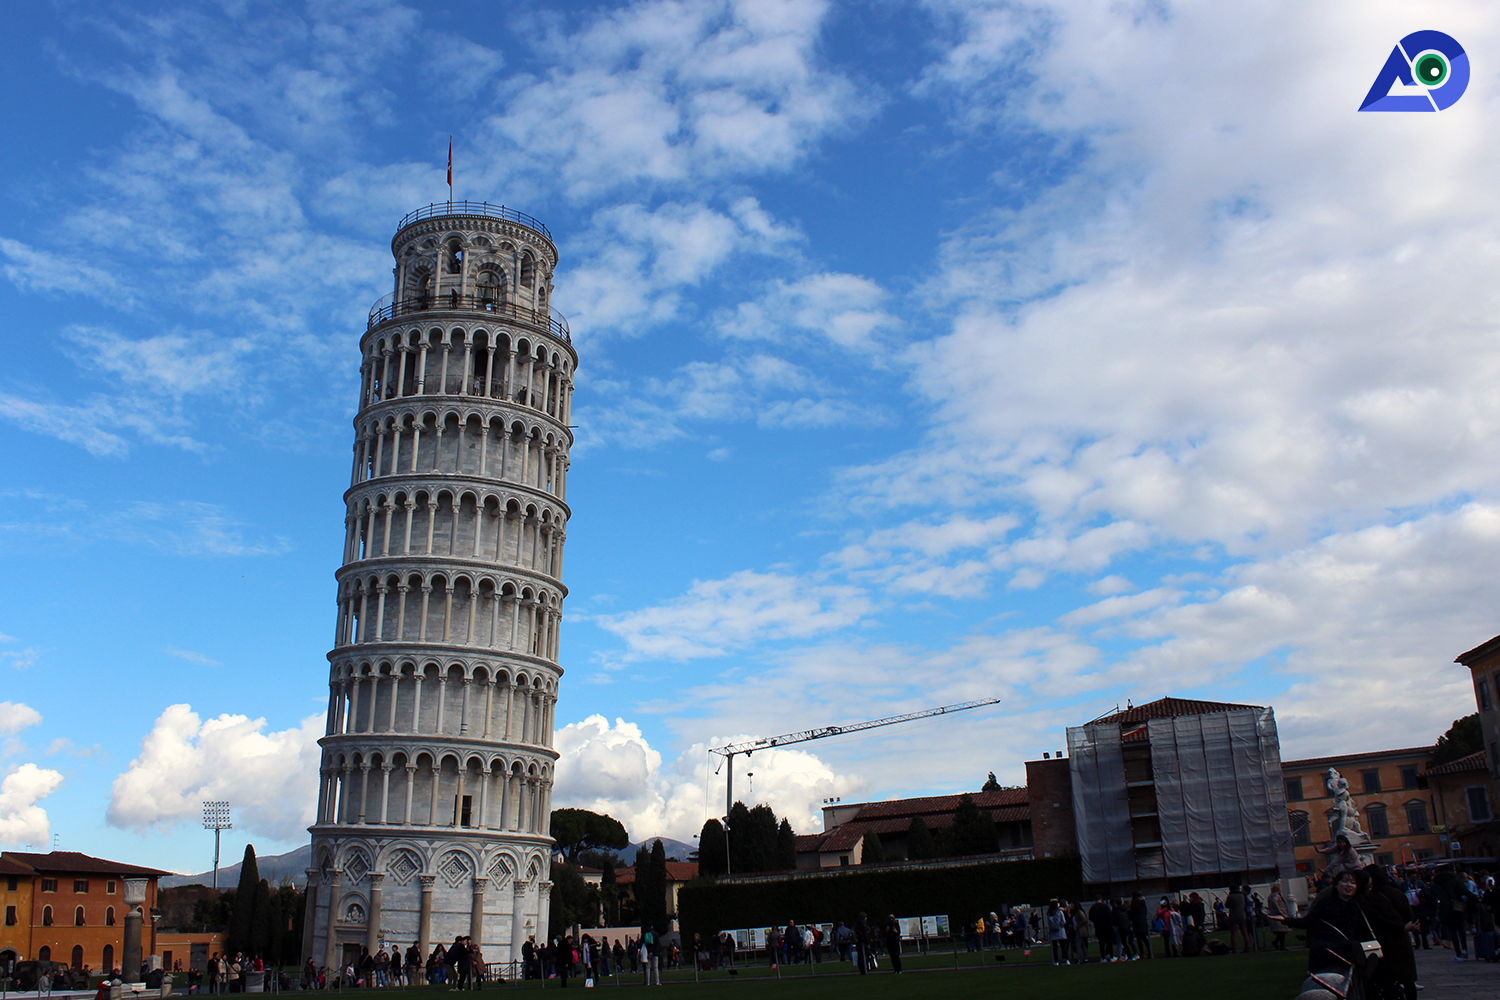 The Leaning Tower of Pisa 2